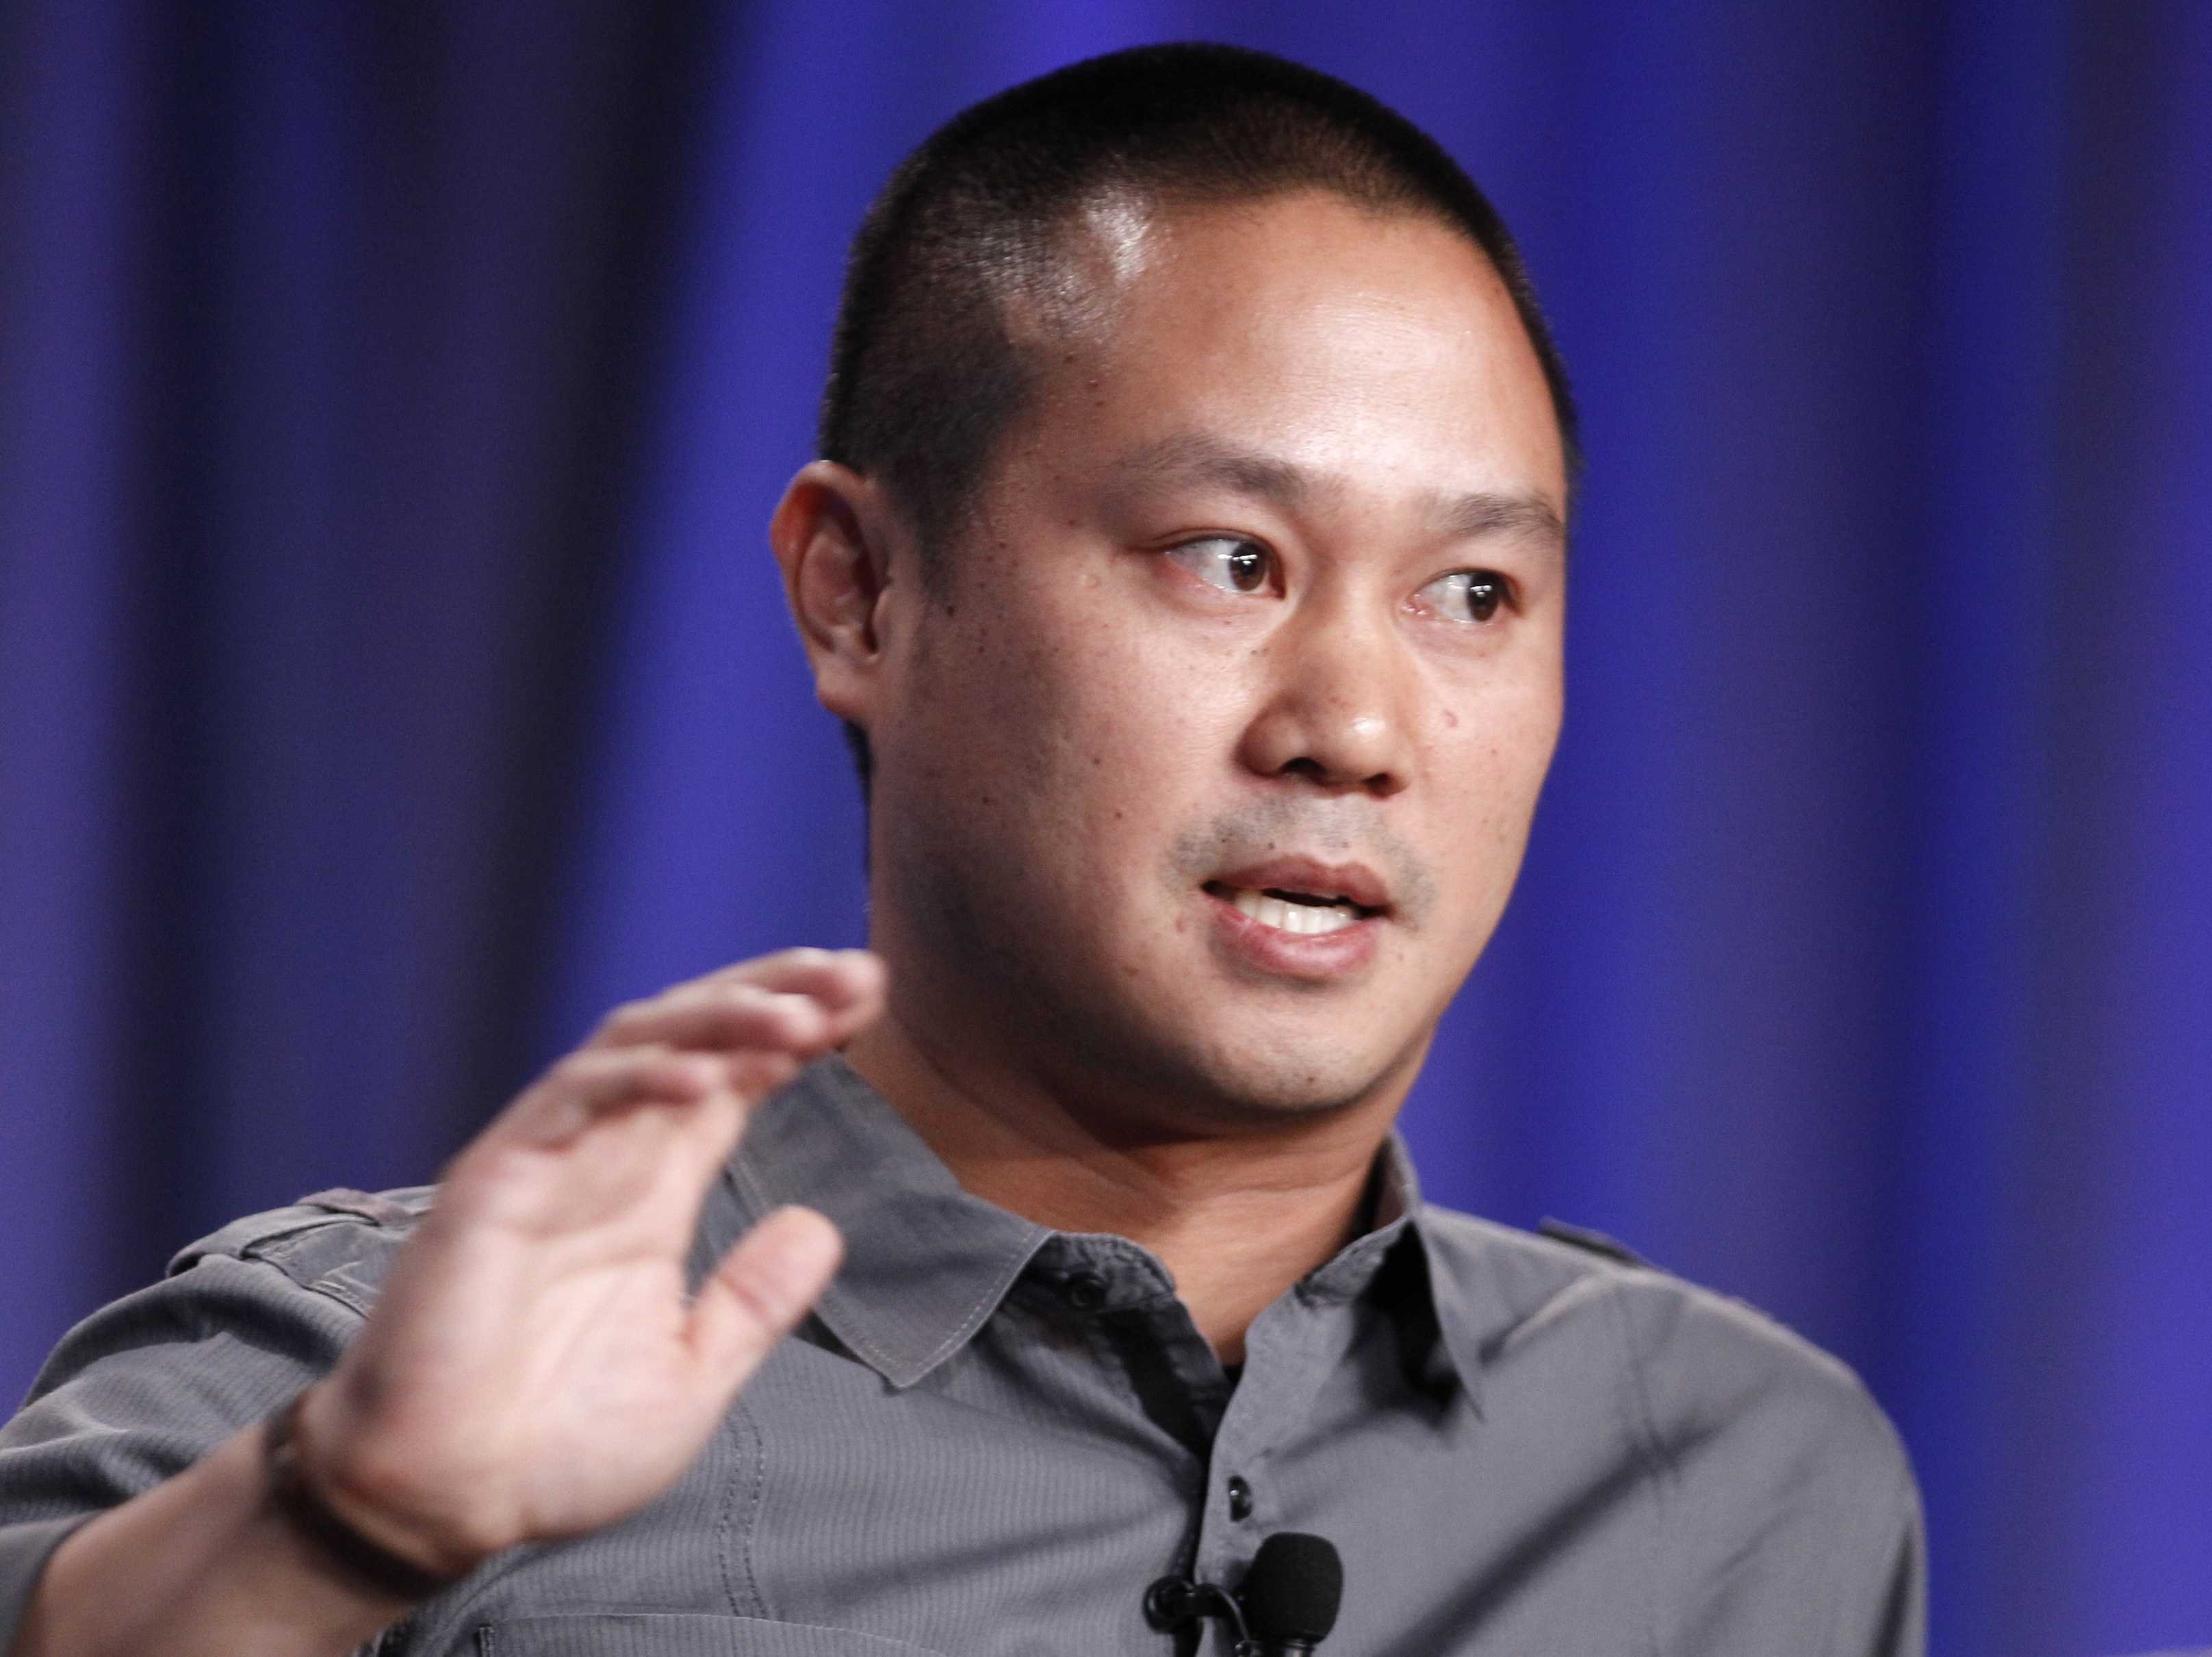 TONY HSIEH: Working Remotely Works If You Do It Right | www.bullfax.com